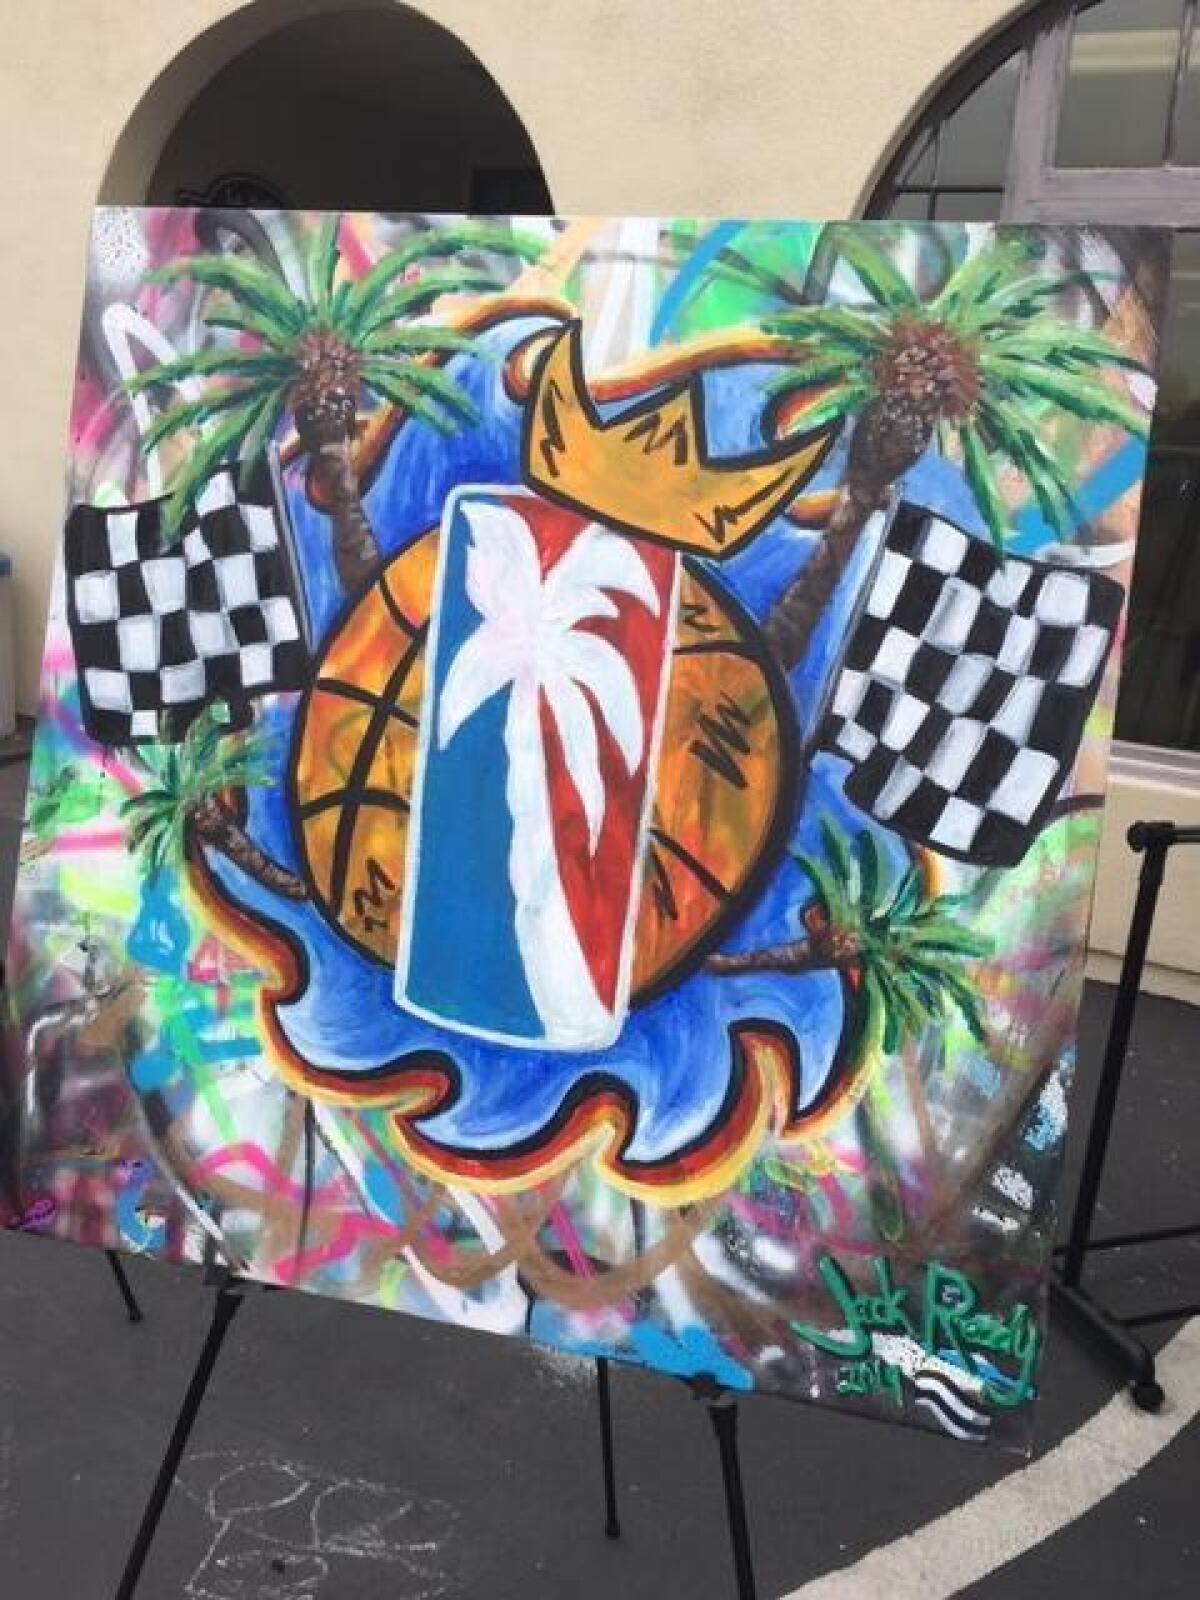 Painting of Sneaks Summer Classic’s new logo by PB artist Jack Ready